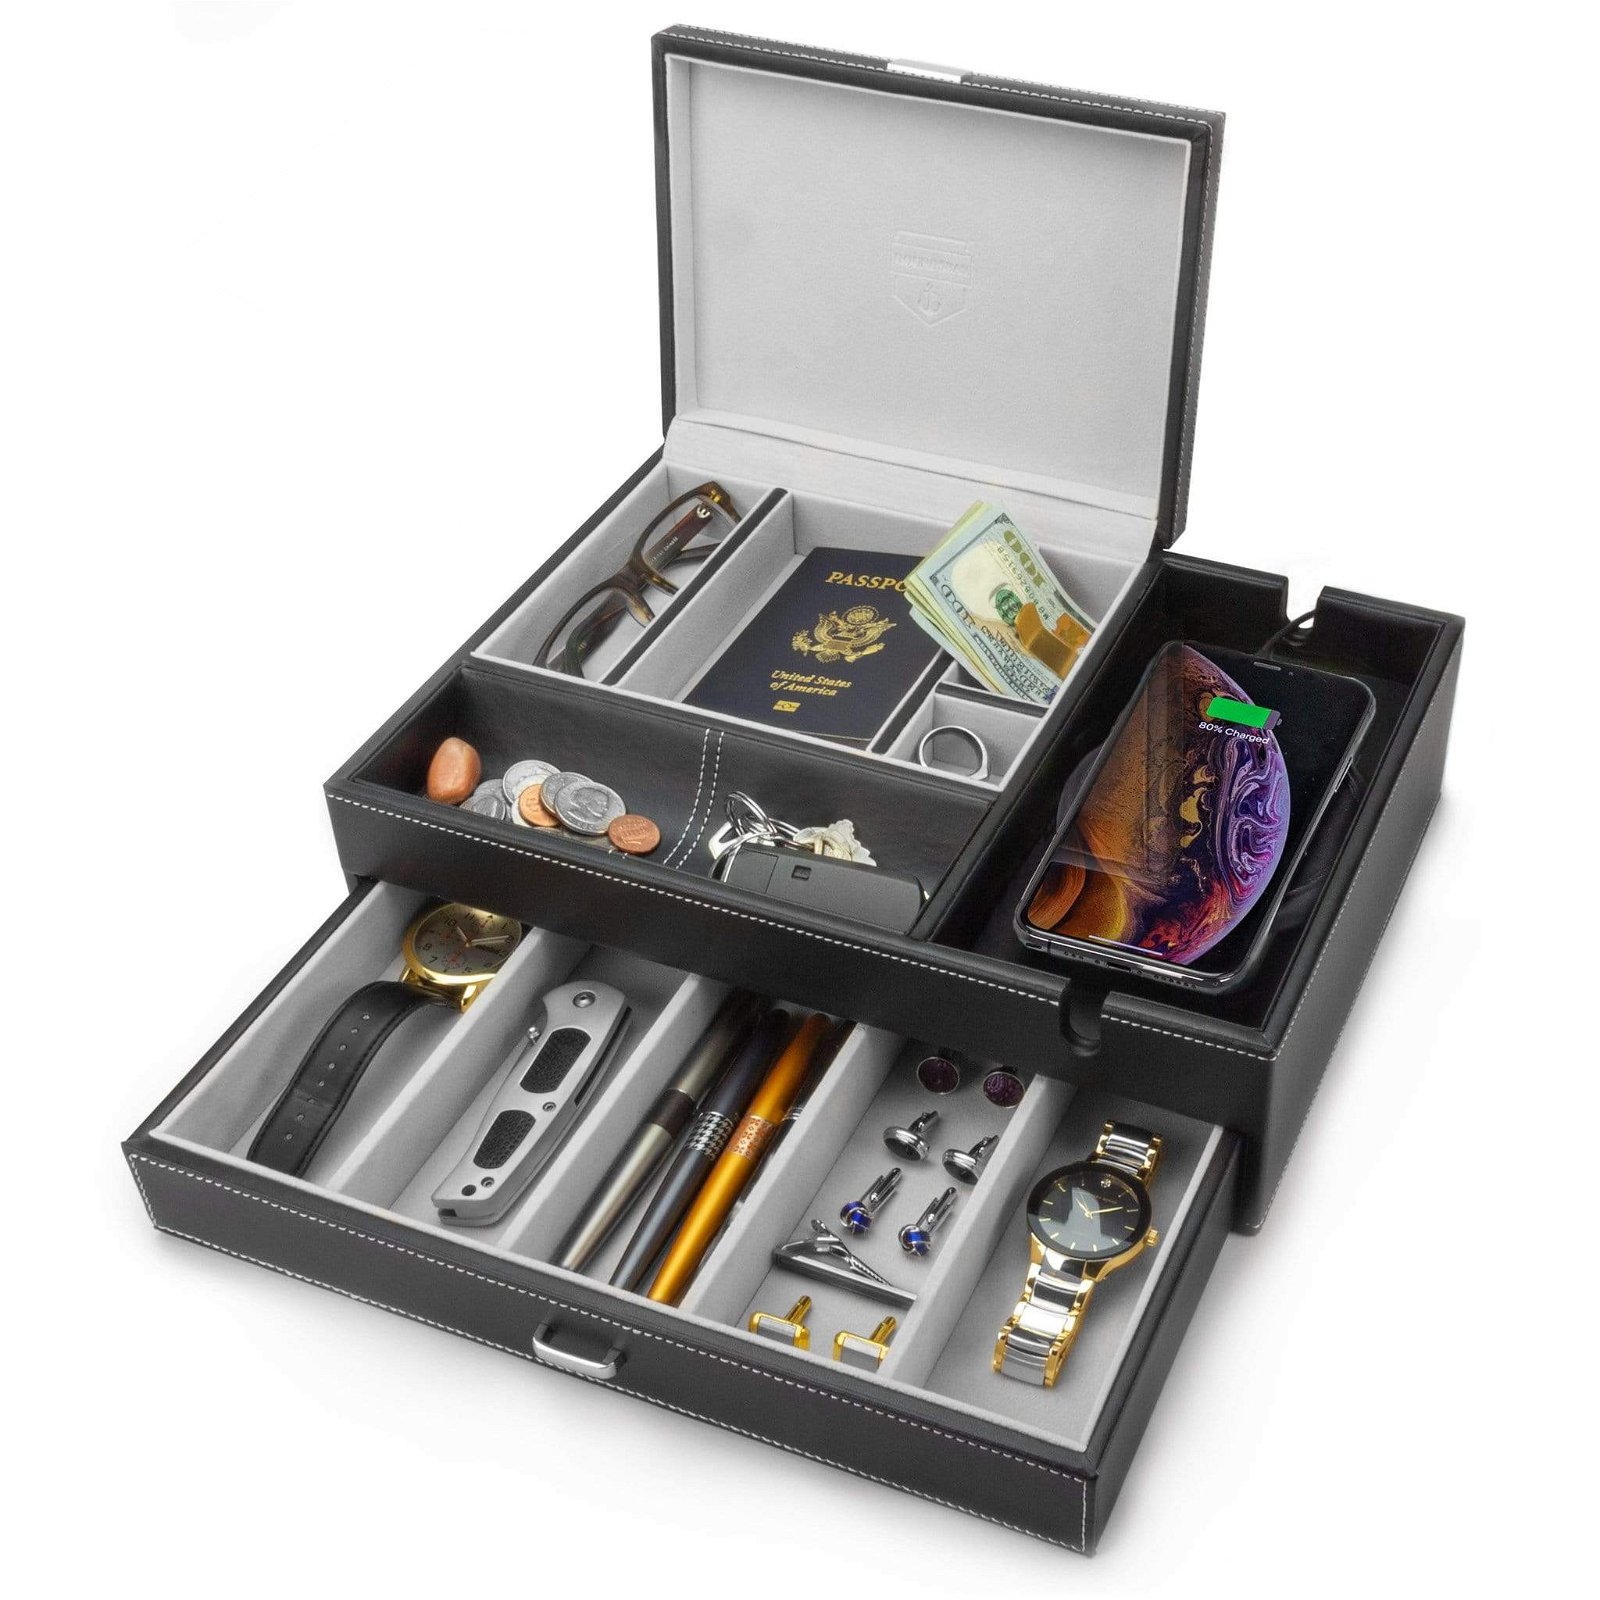 Image of The Admiral - Big Dresser Valet Box Organizer with Large Smartphone Charging Station